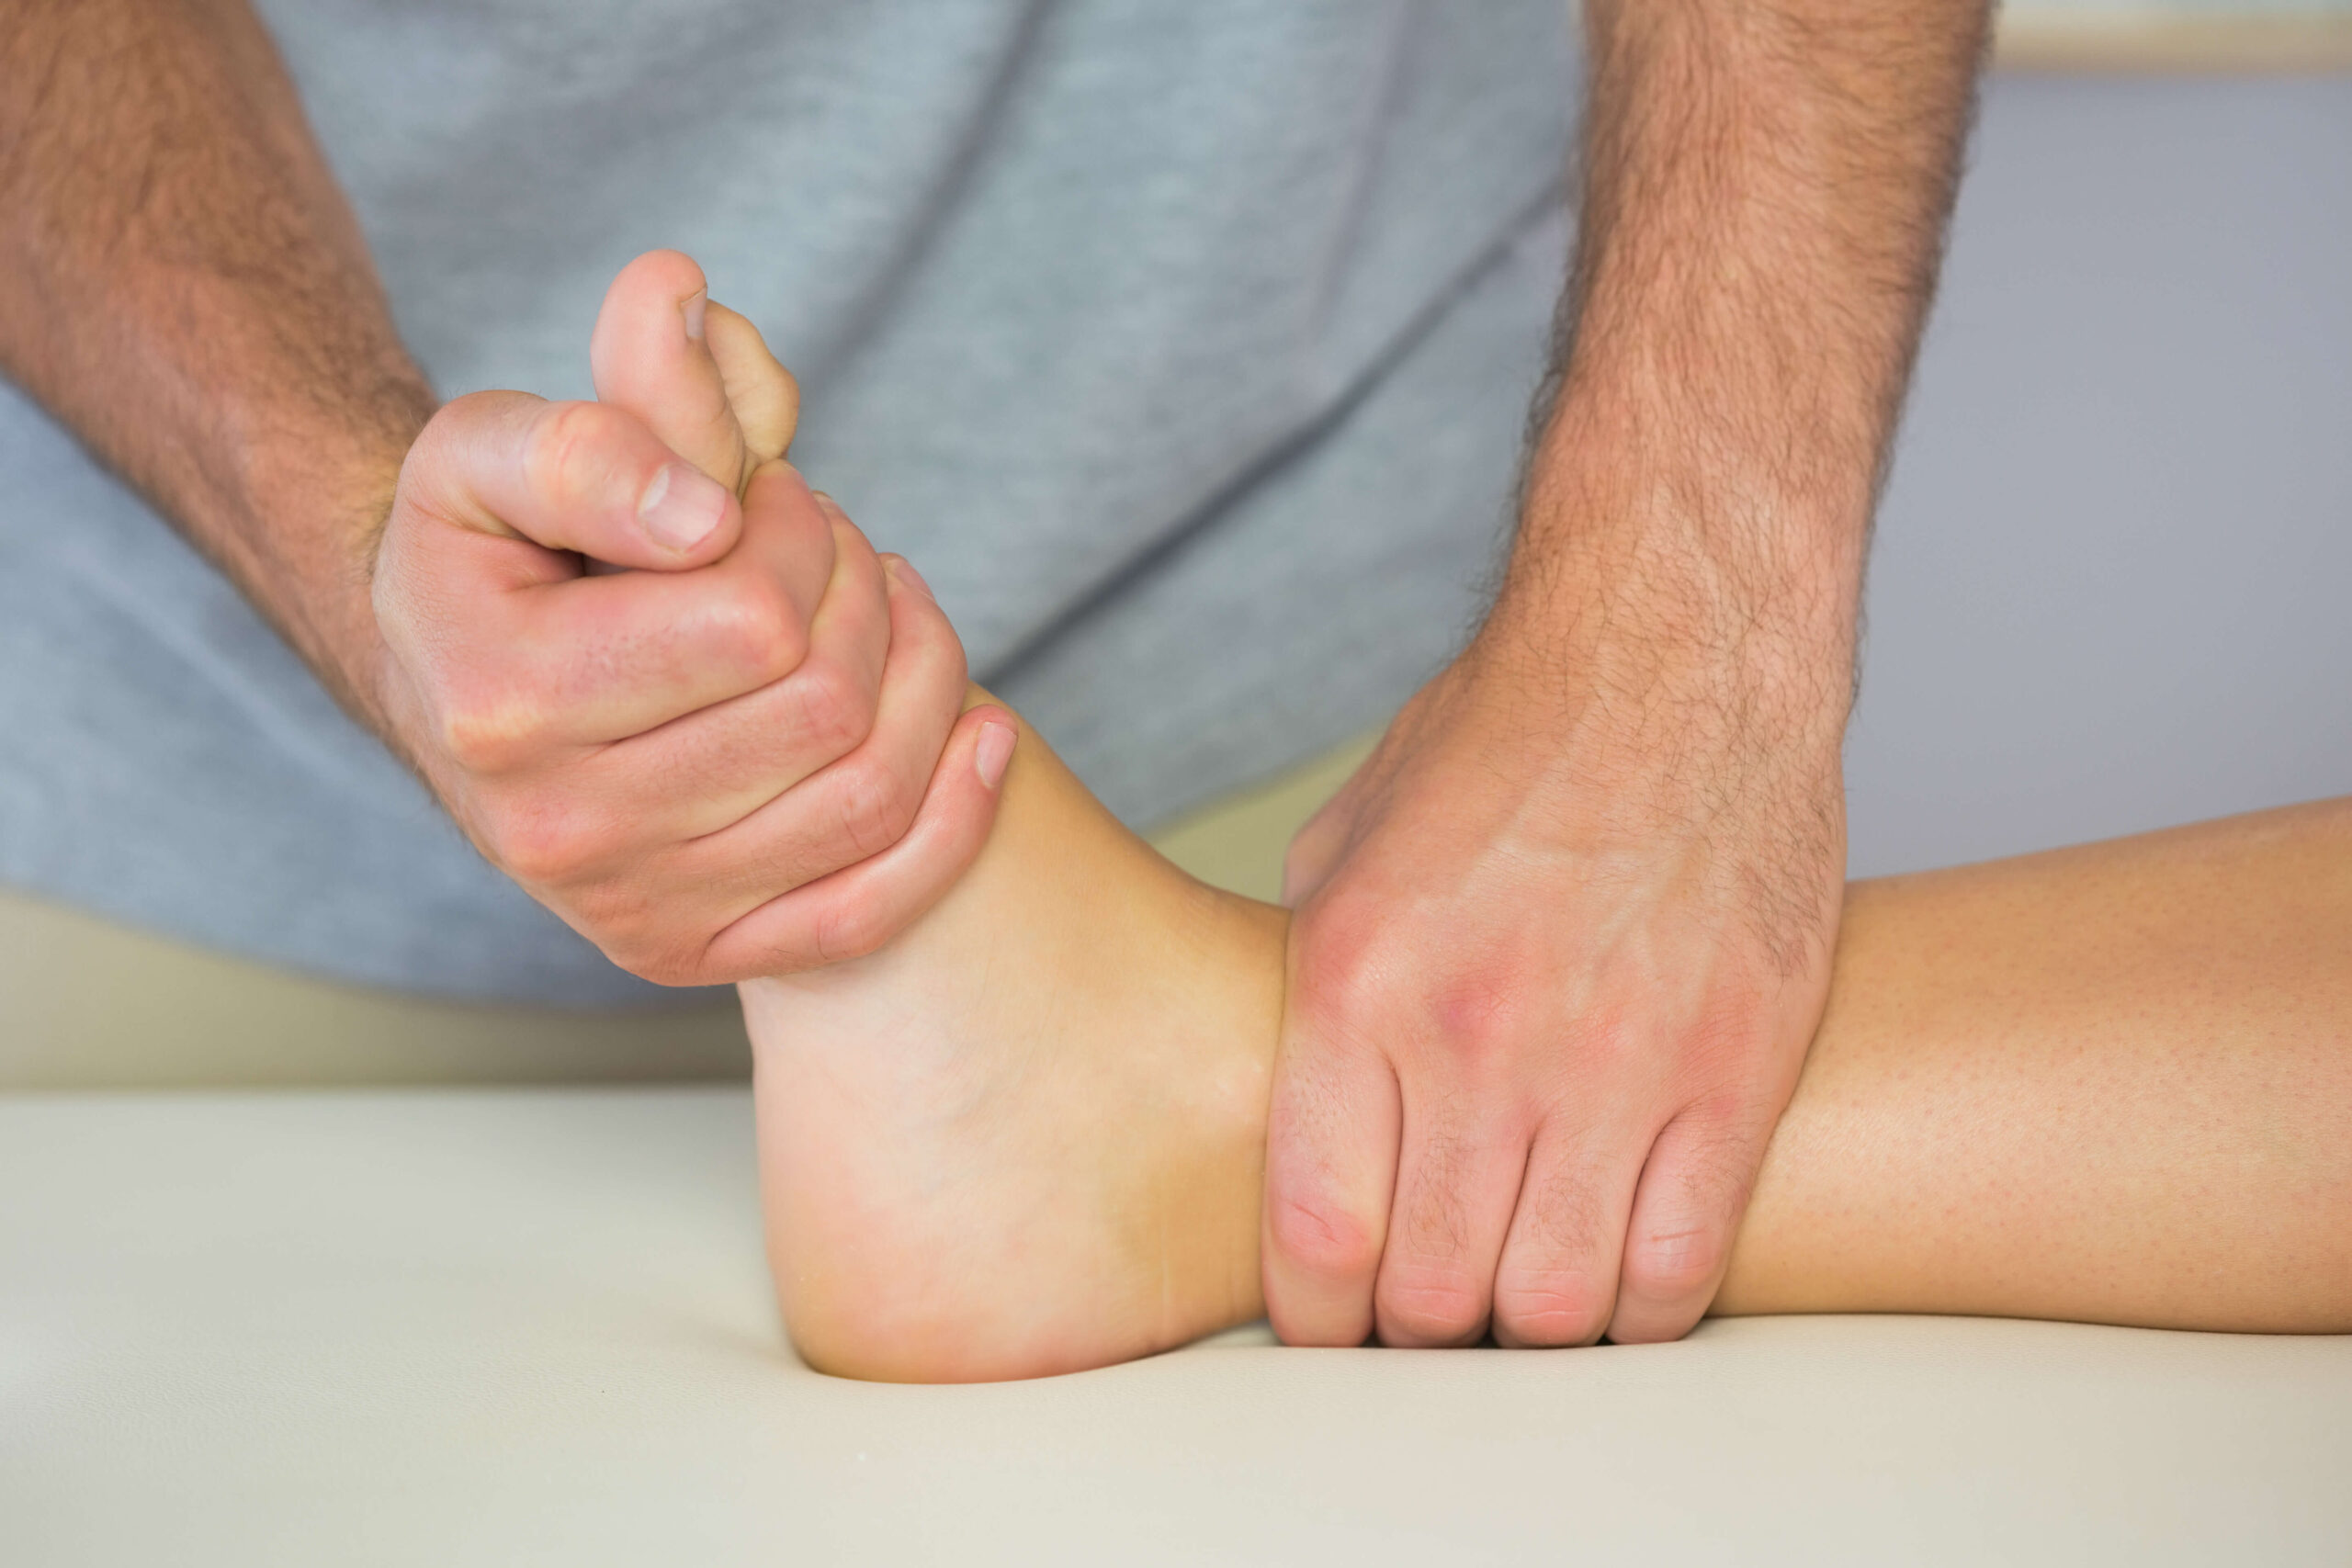 Foot and Ankle Mechanics